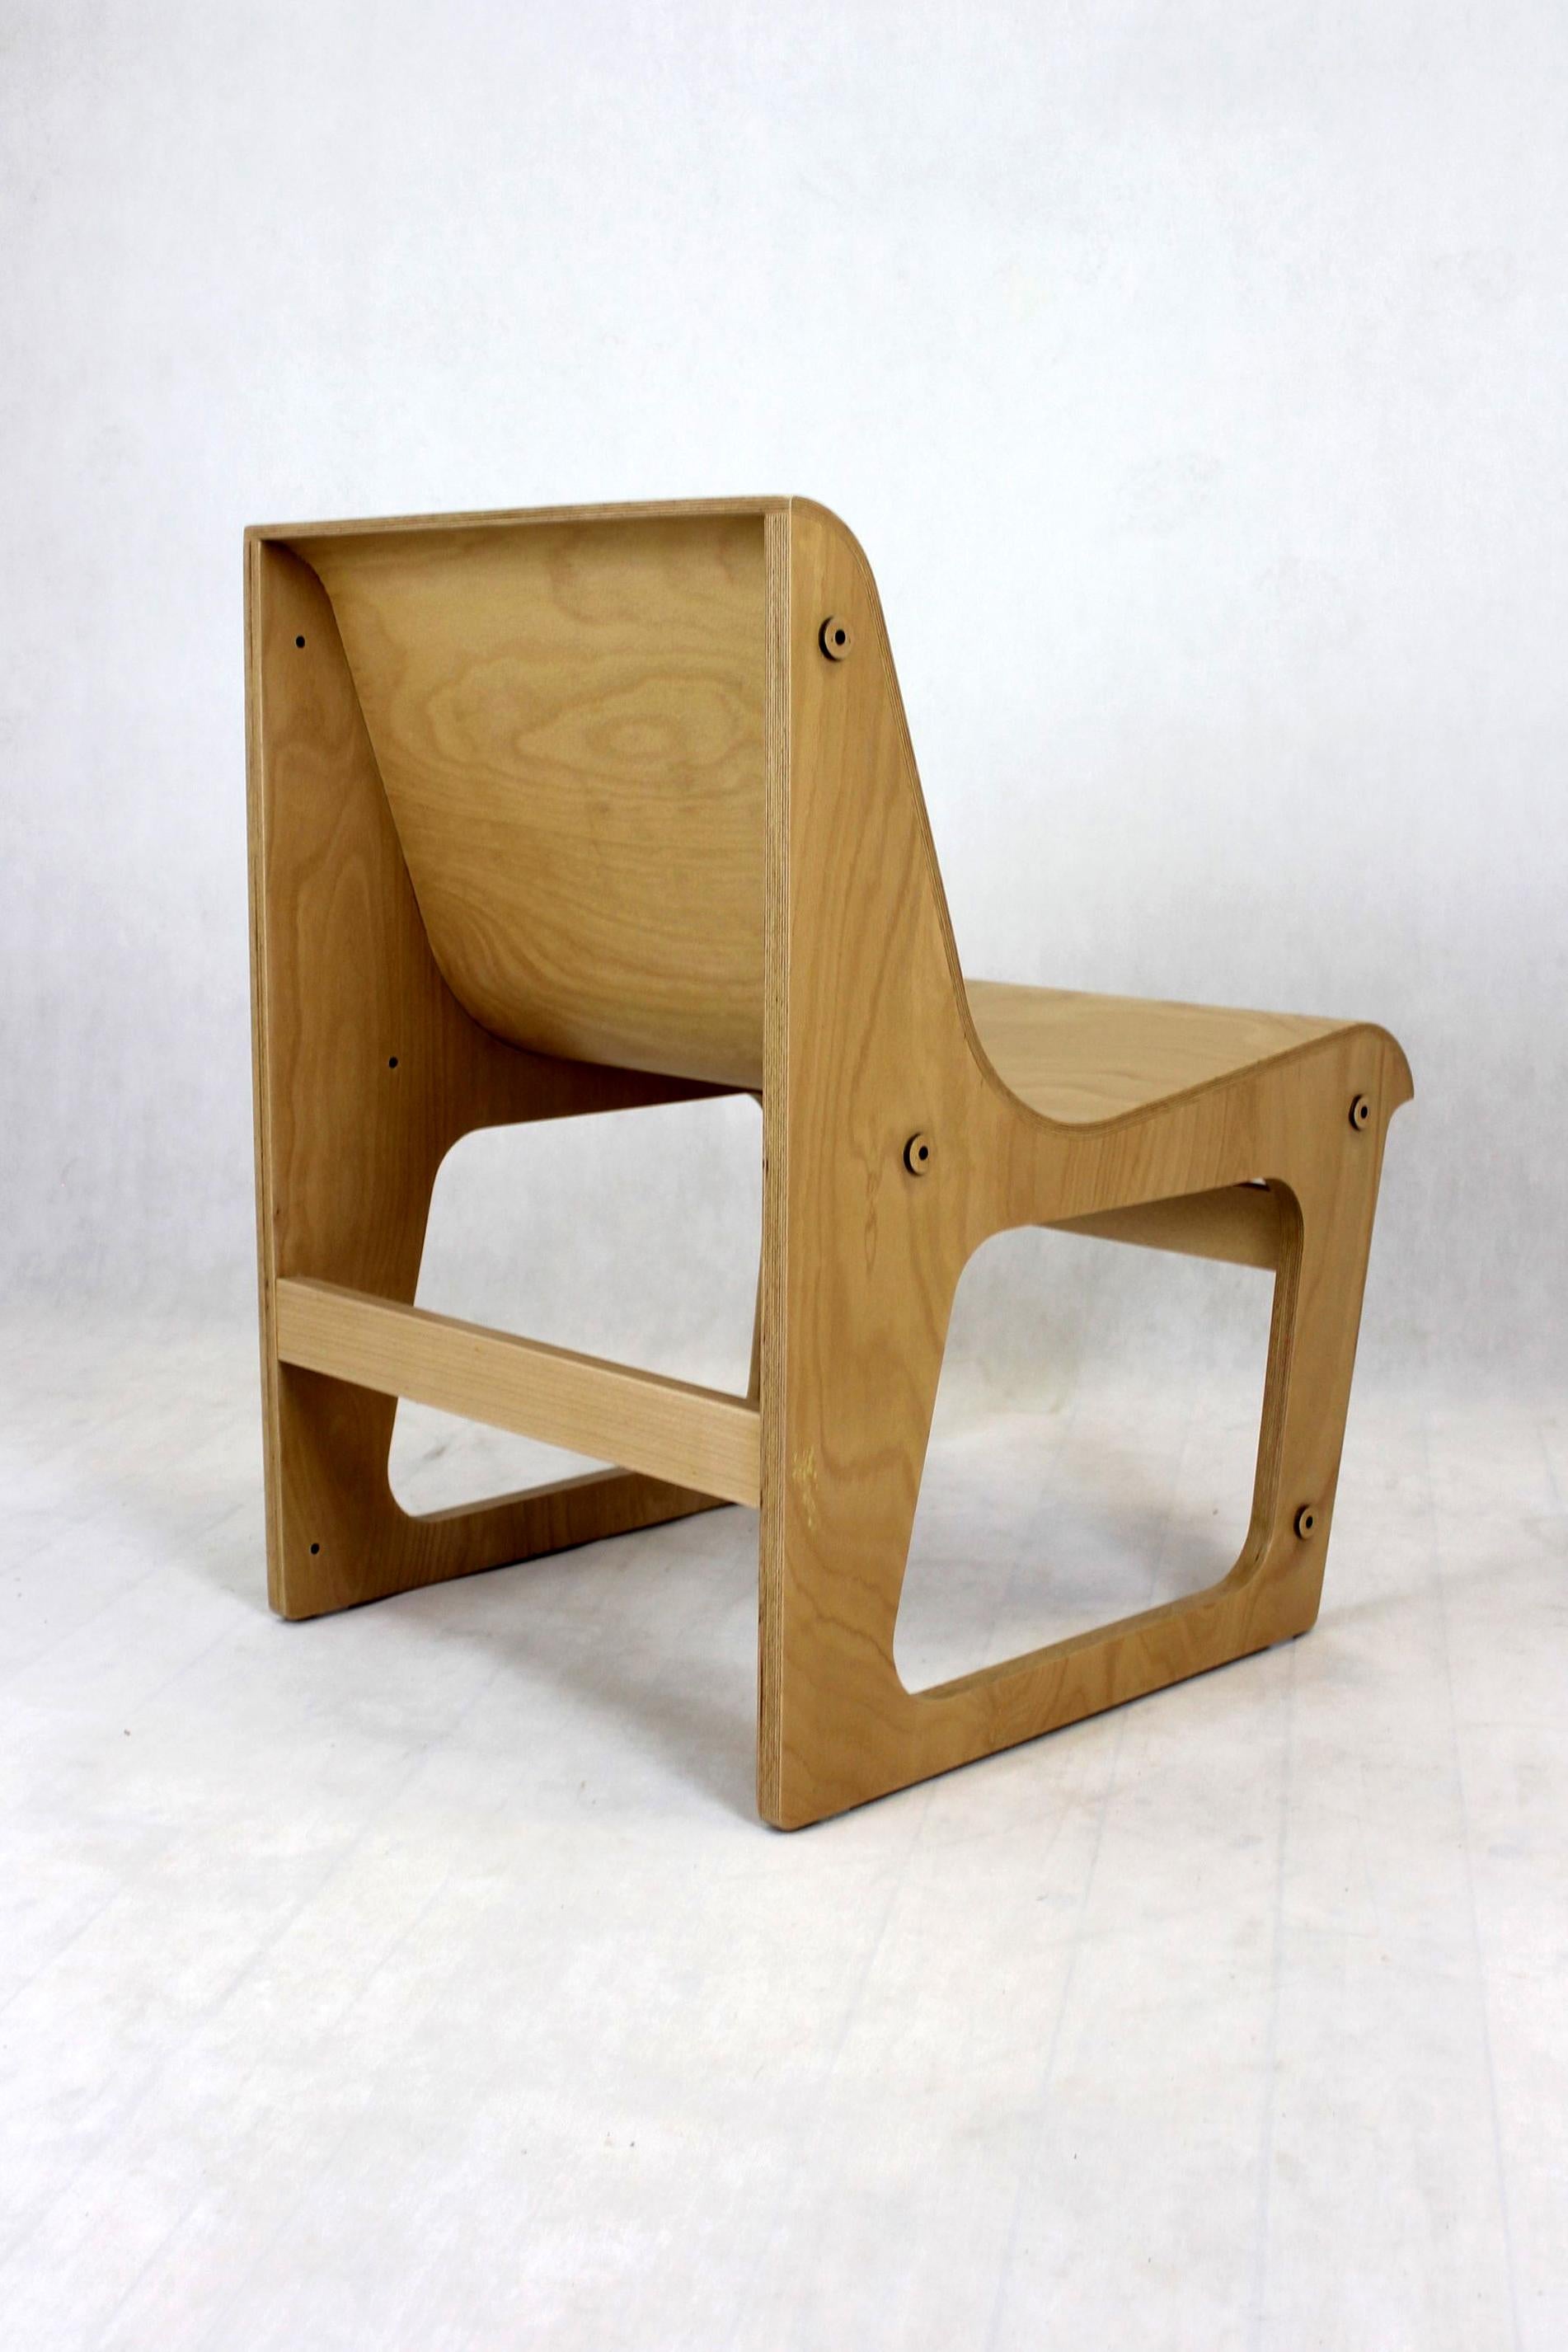 Beech Plywood Symposio Bench / Chairs by René Šulc for Ton, 2010s 8